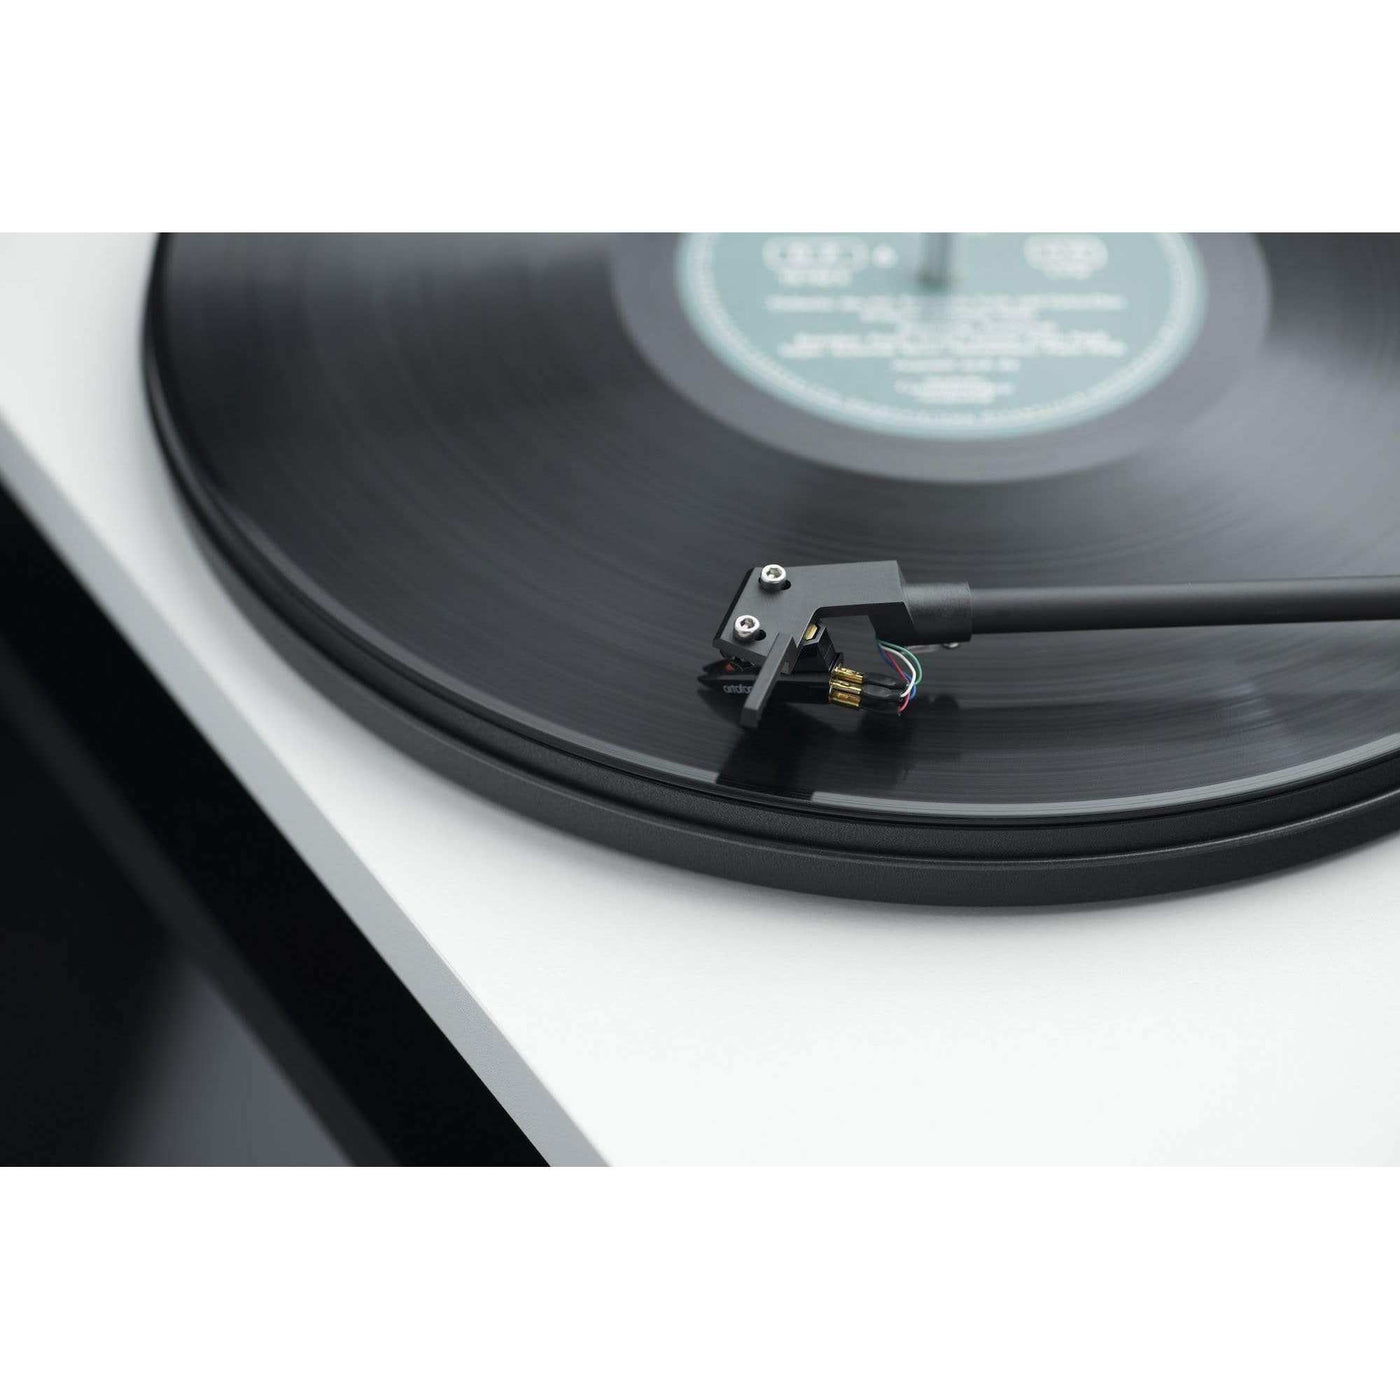 Pro-Ject Pro-Ject Primary E Turntable with OM Cartridge Turntables